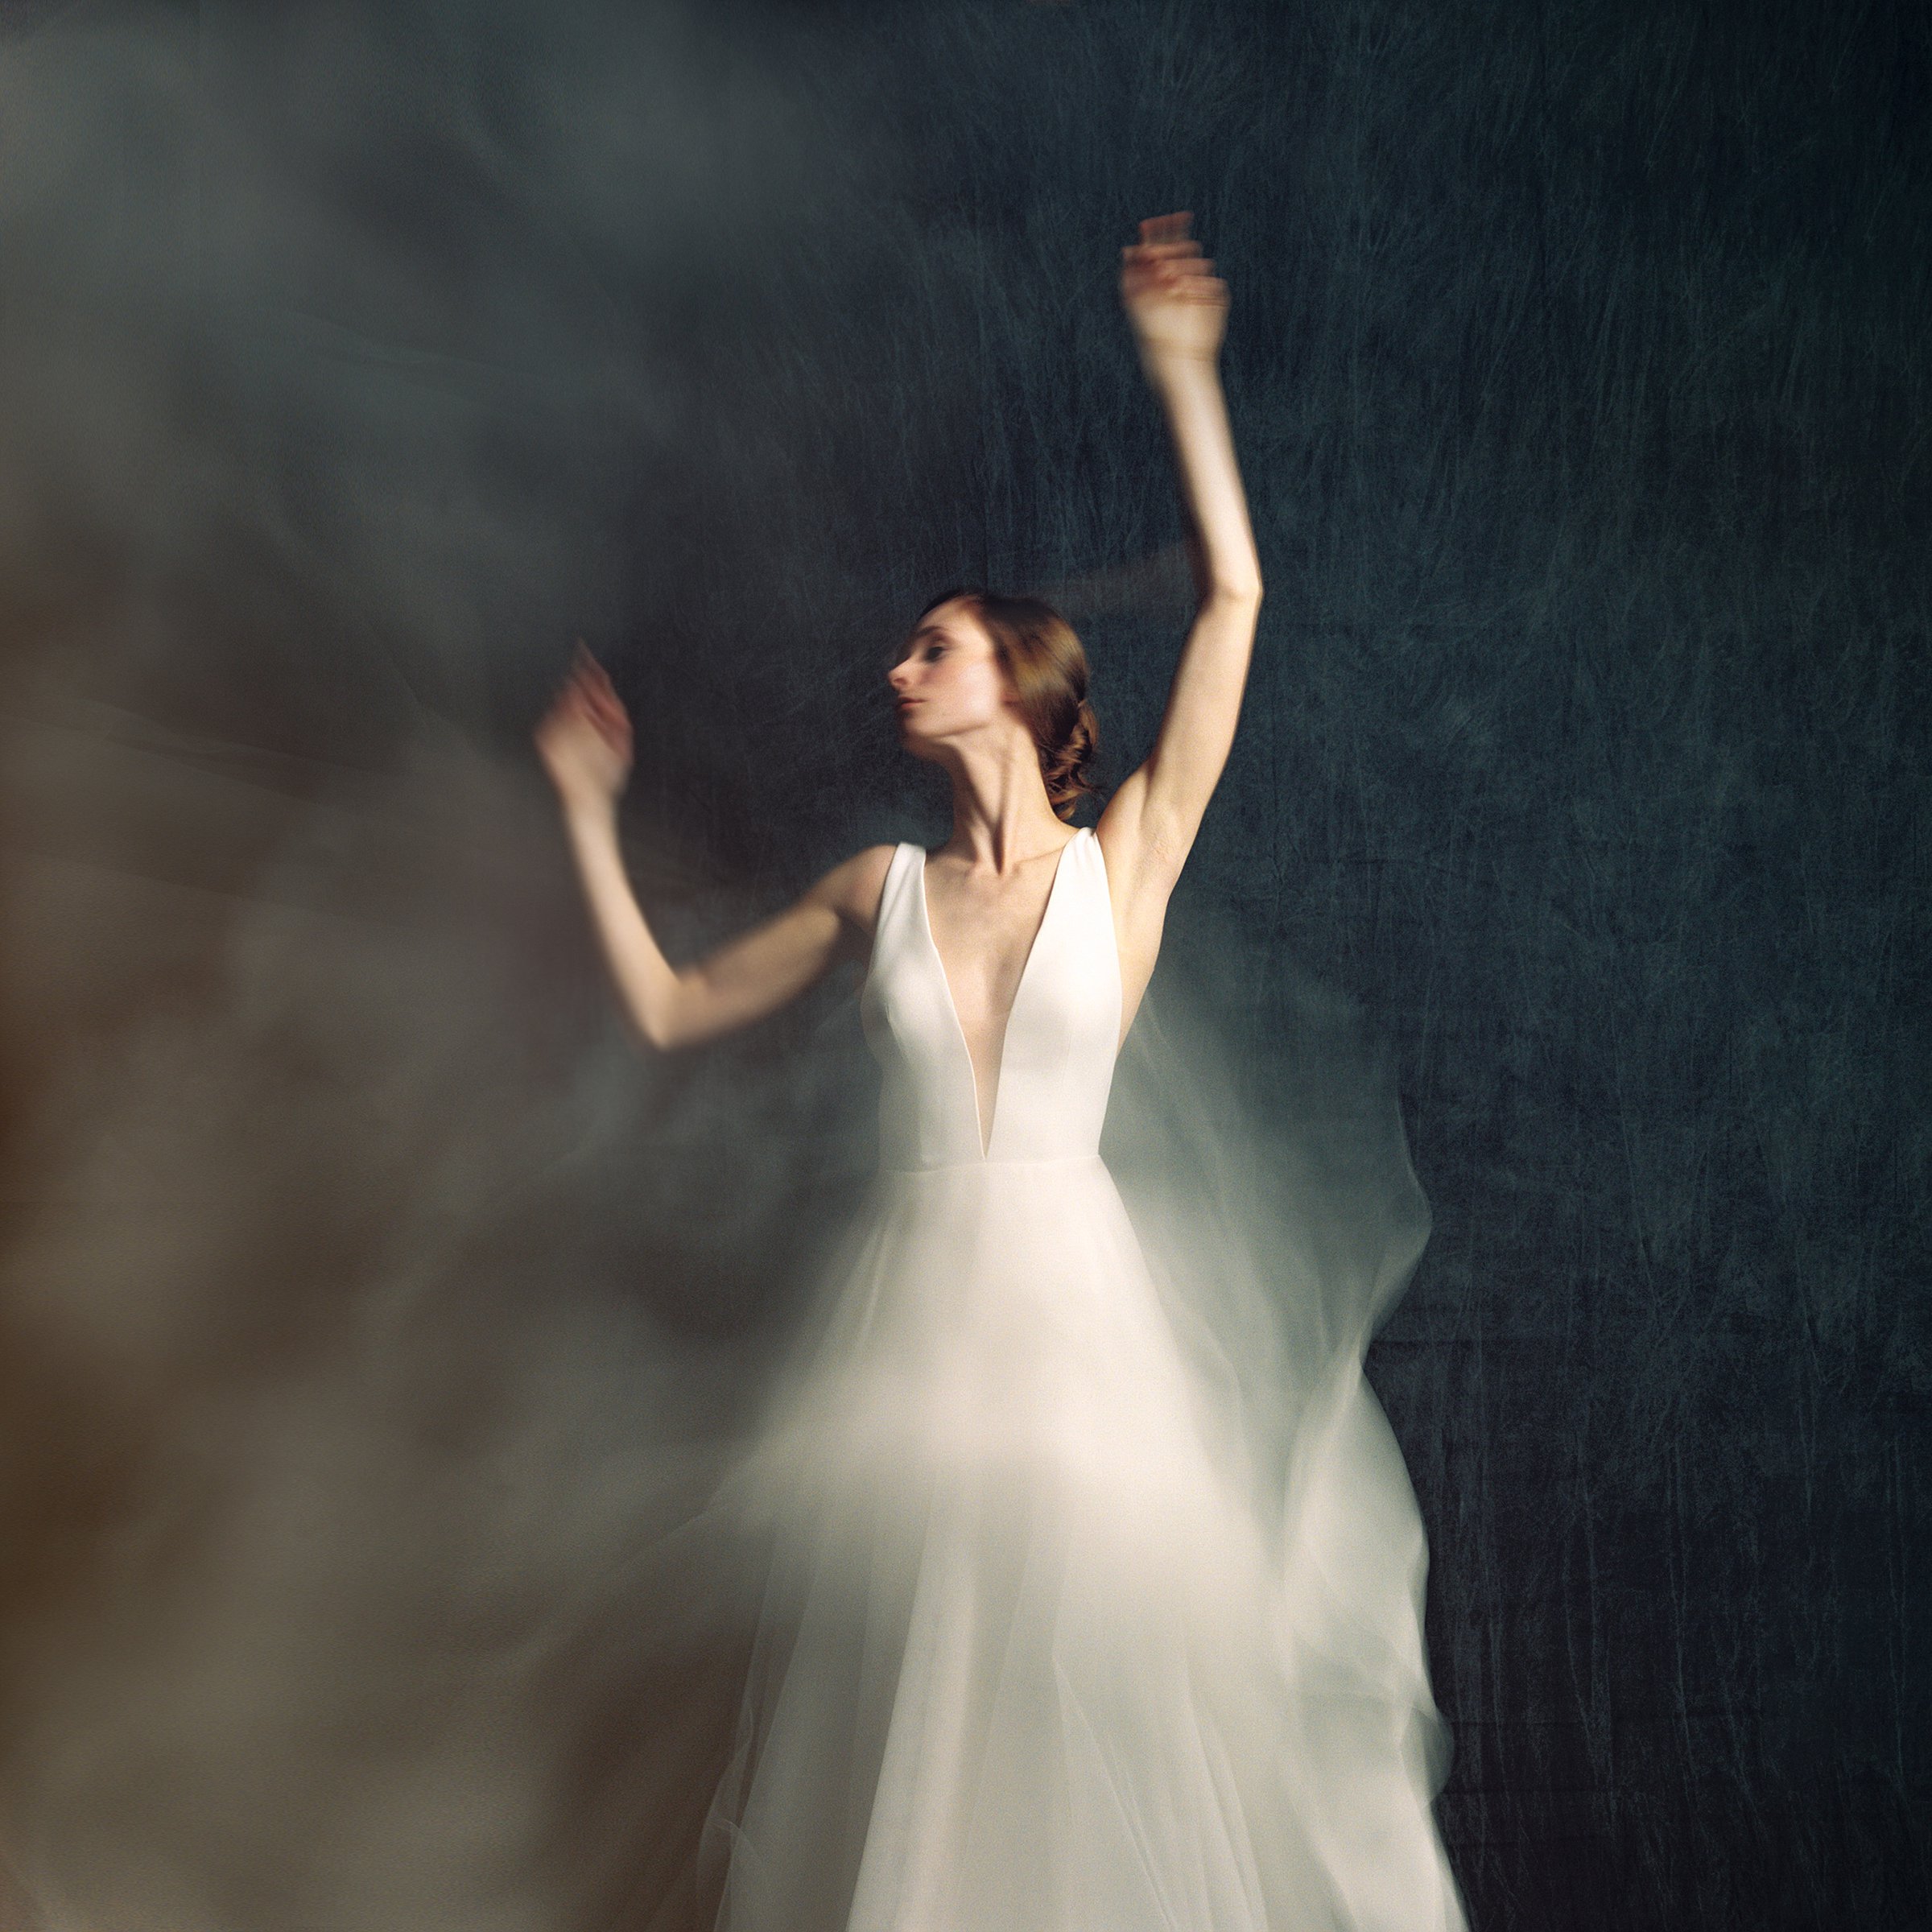 movement on film using a hasselblad 202fa and kodak portra 800 film with a bride in wedding dress in studio